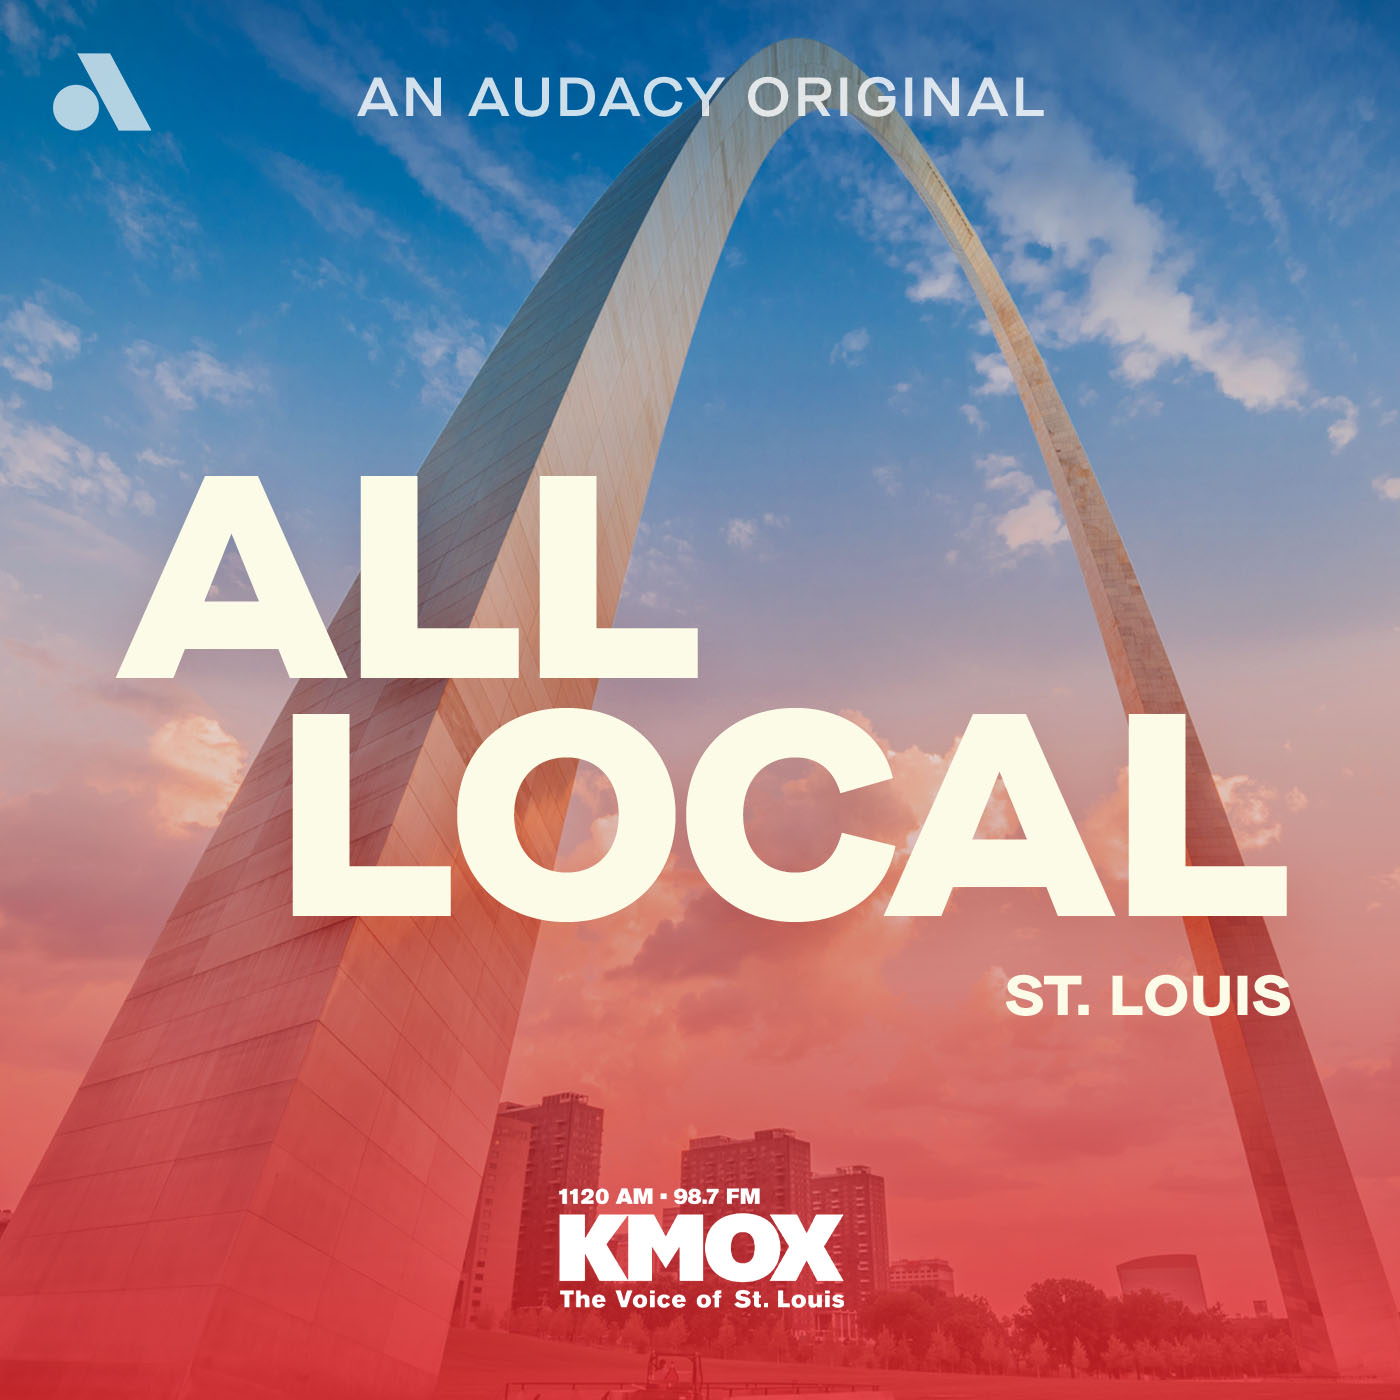 St. Louis All Local PM: Prison guards charged with murder